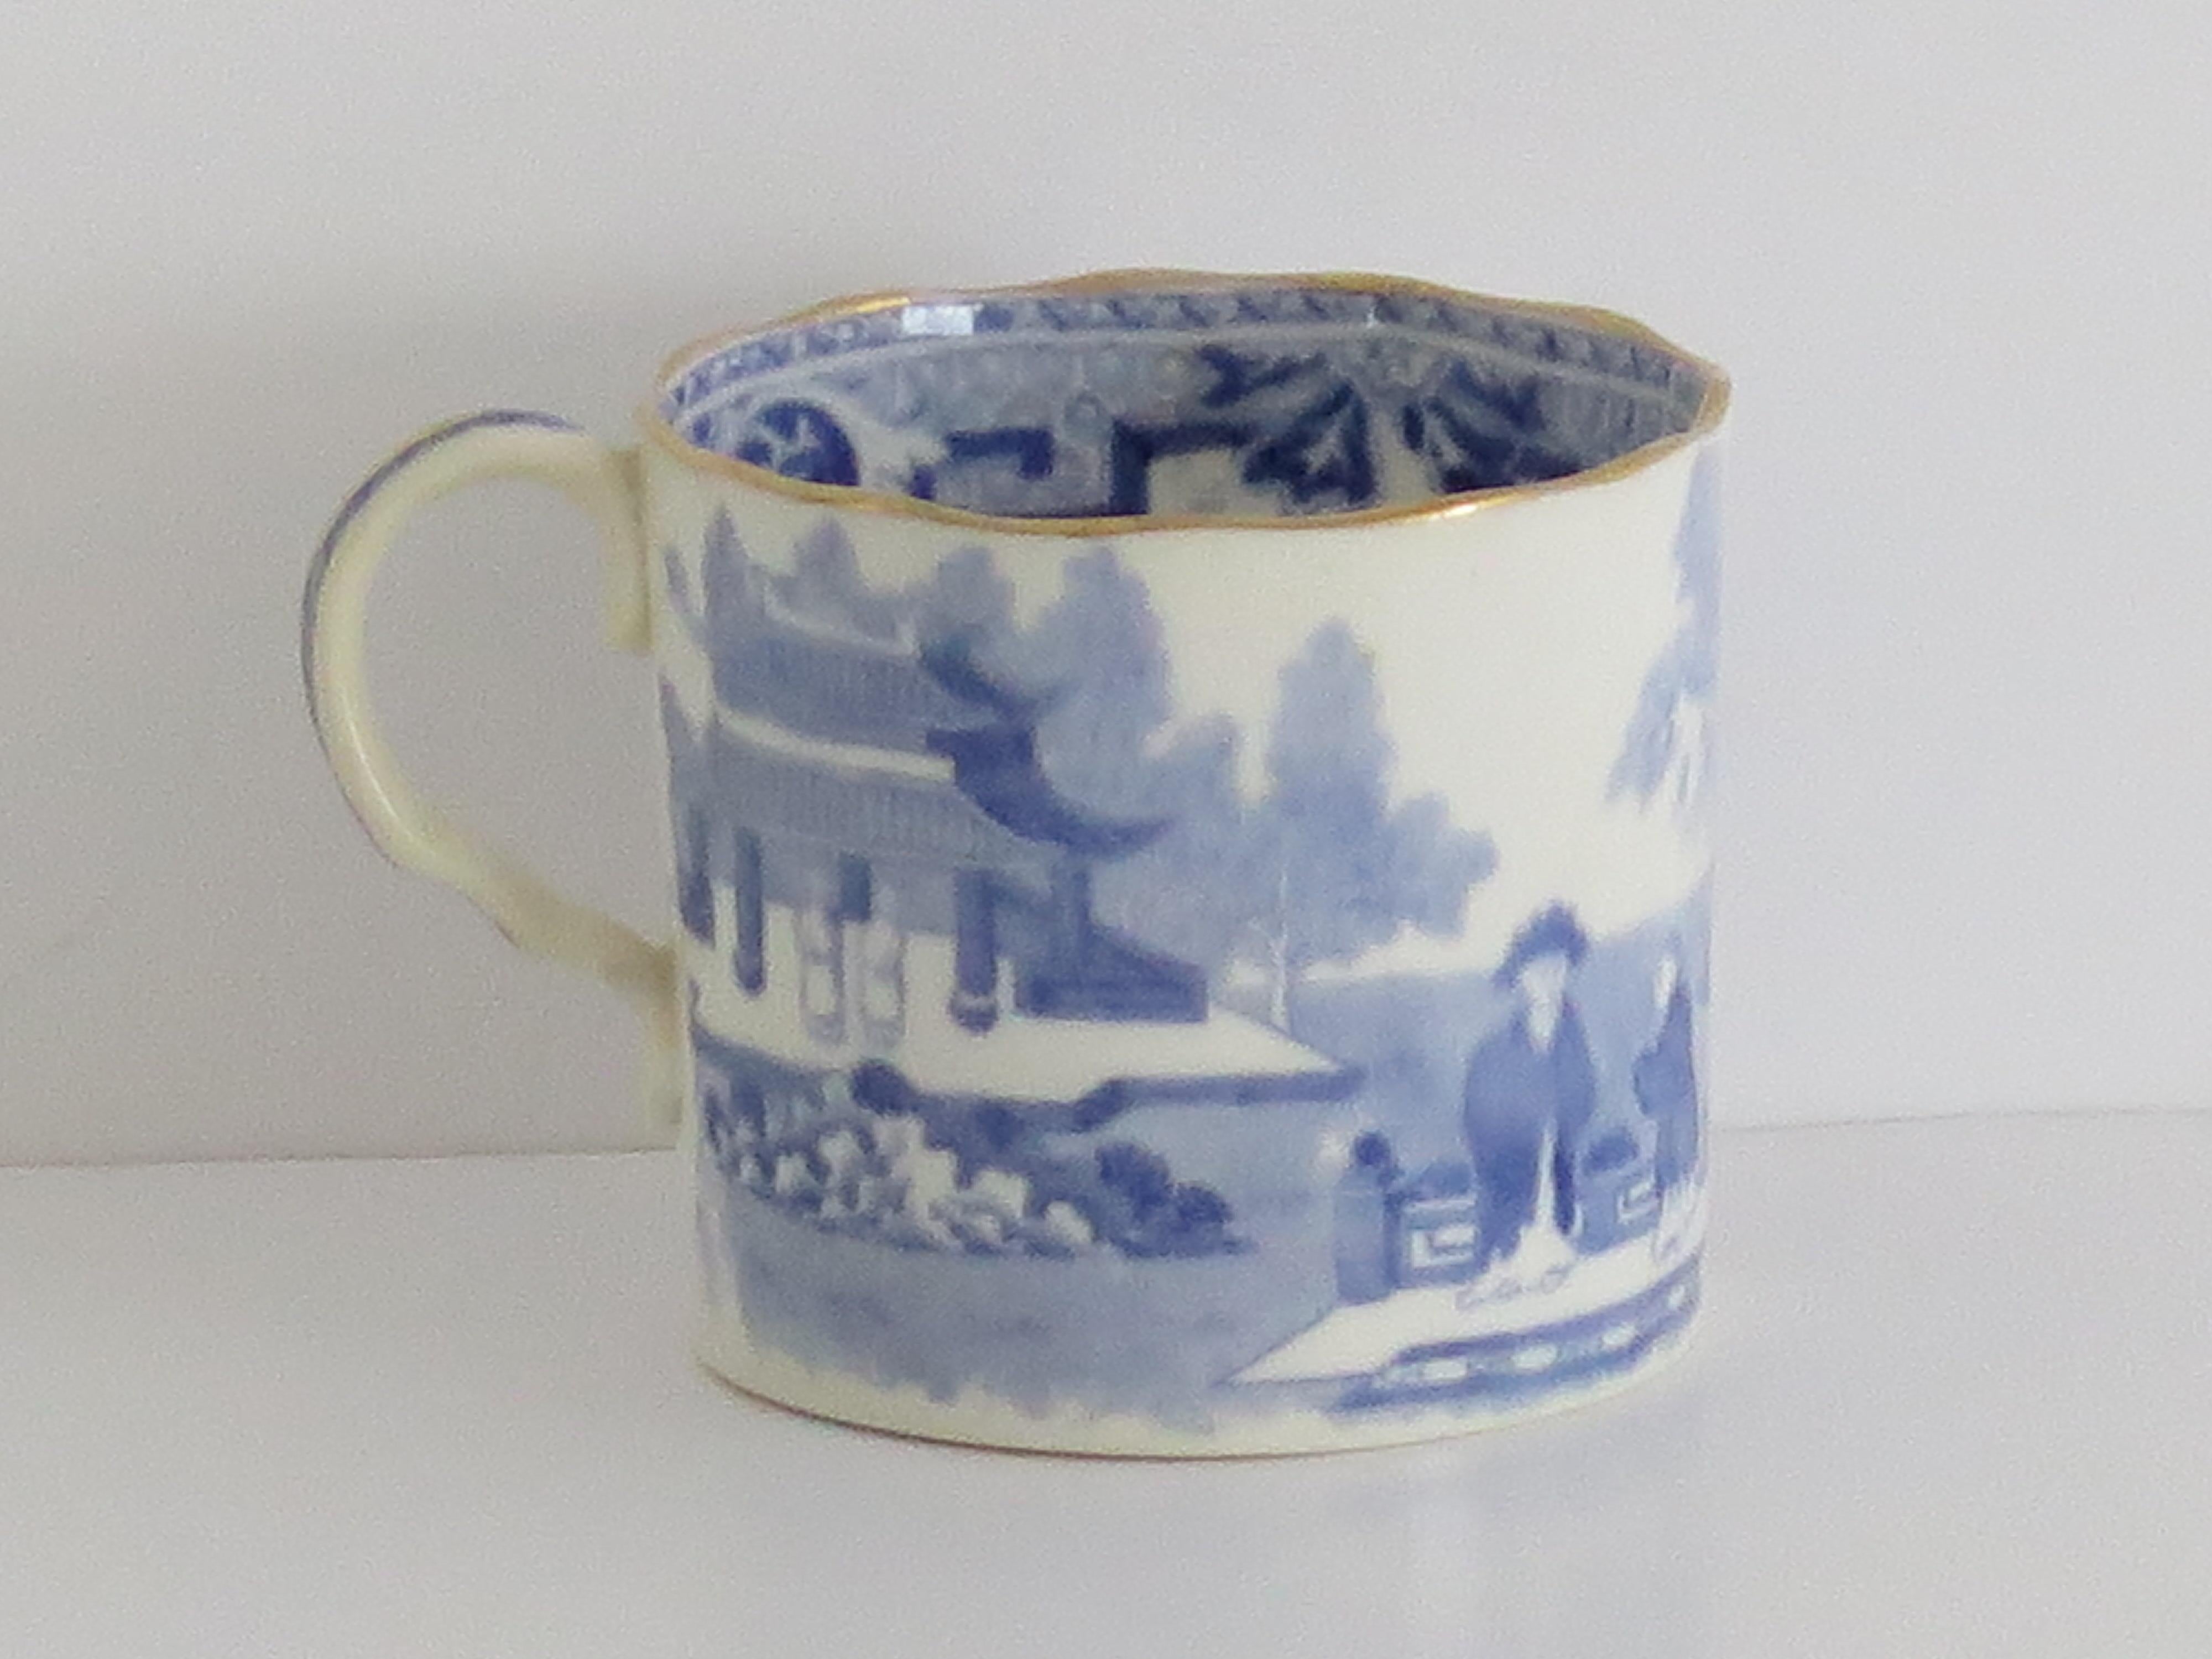 This is a blue and white hand gilded porcelain coffee can in the Chinaman on Verandah pattern, made by Miles Mason (Mason's), Staffordshire Potteries, England around the turn of the 18th century, circa 1805.

The cup is well potted with slightly